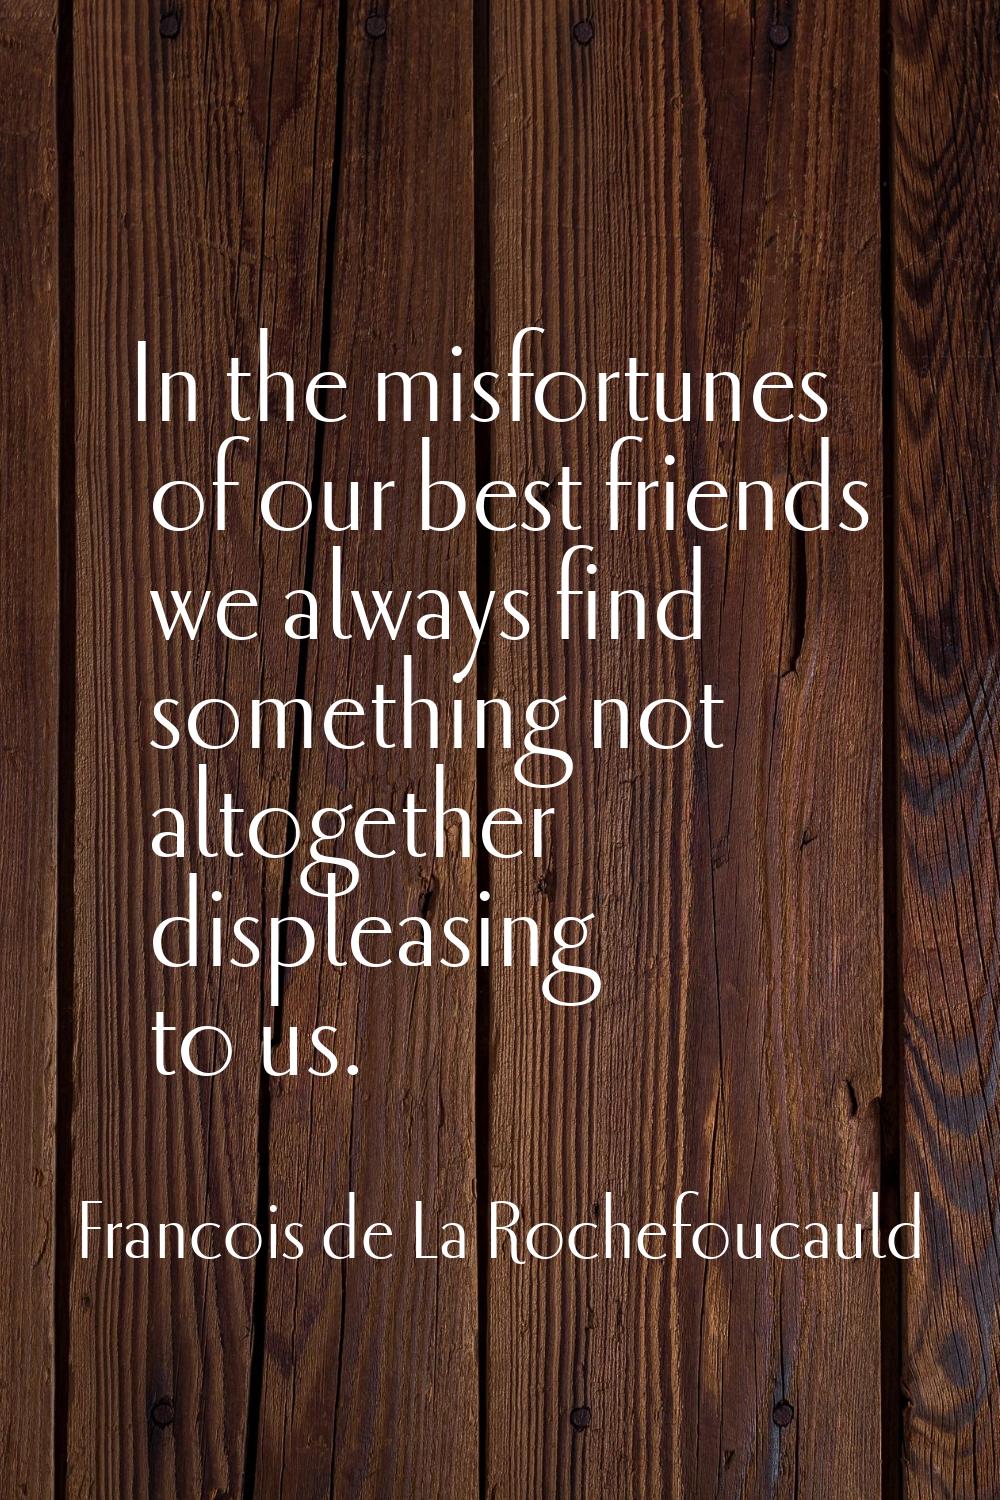 In the misfortunes of our best friends we always find something not altogether displeasing to us.